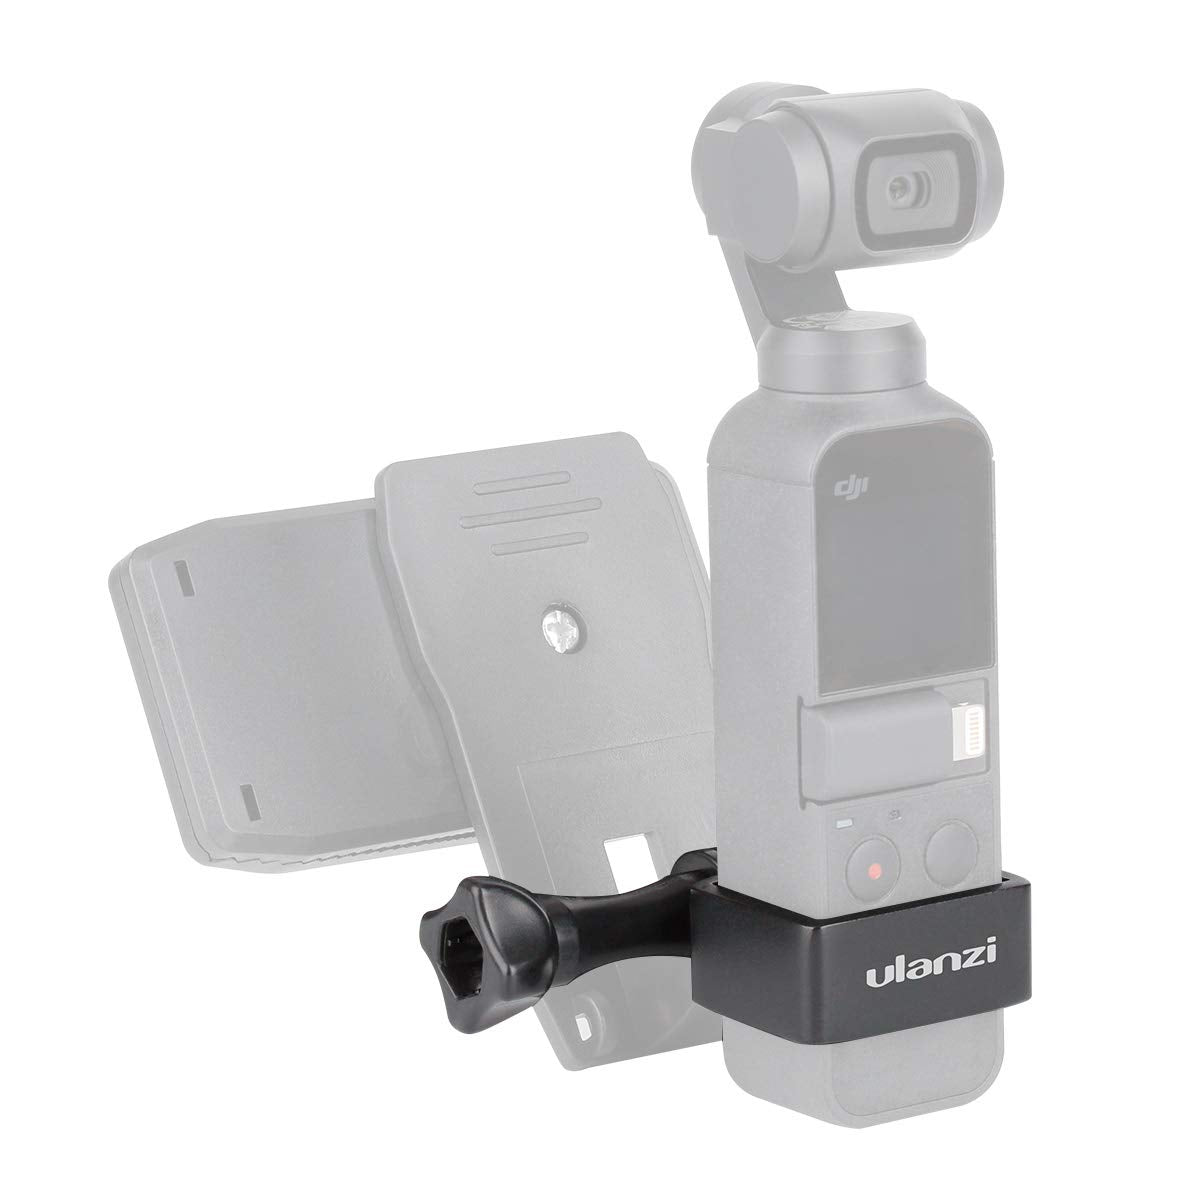 Ulanzi OP-3 Osmo Pocket Accessories Mobile Phone Holder Mount Set Fixed Stand Bracket for Dji Osmo Pocket Handheld Cameras